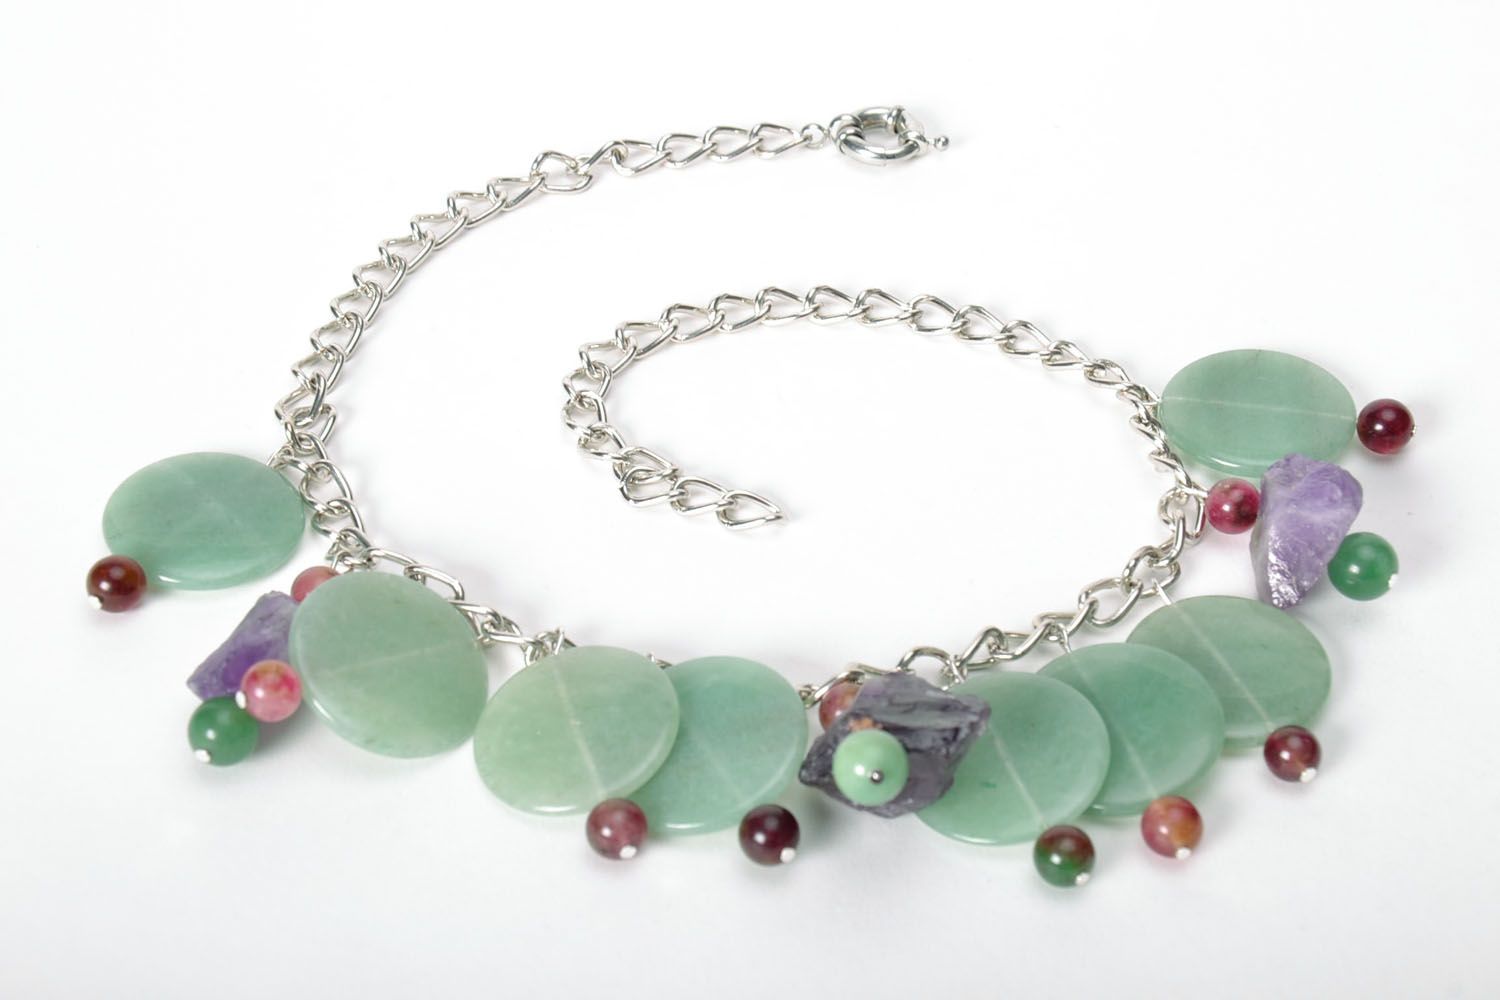 Homemade necklace with natural stones photo 5